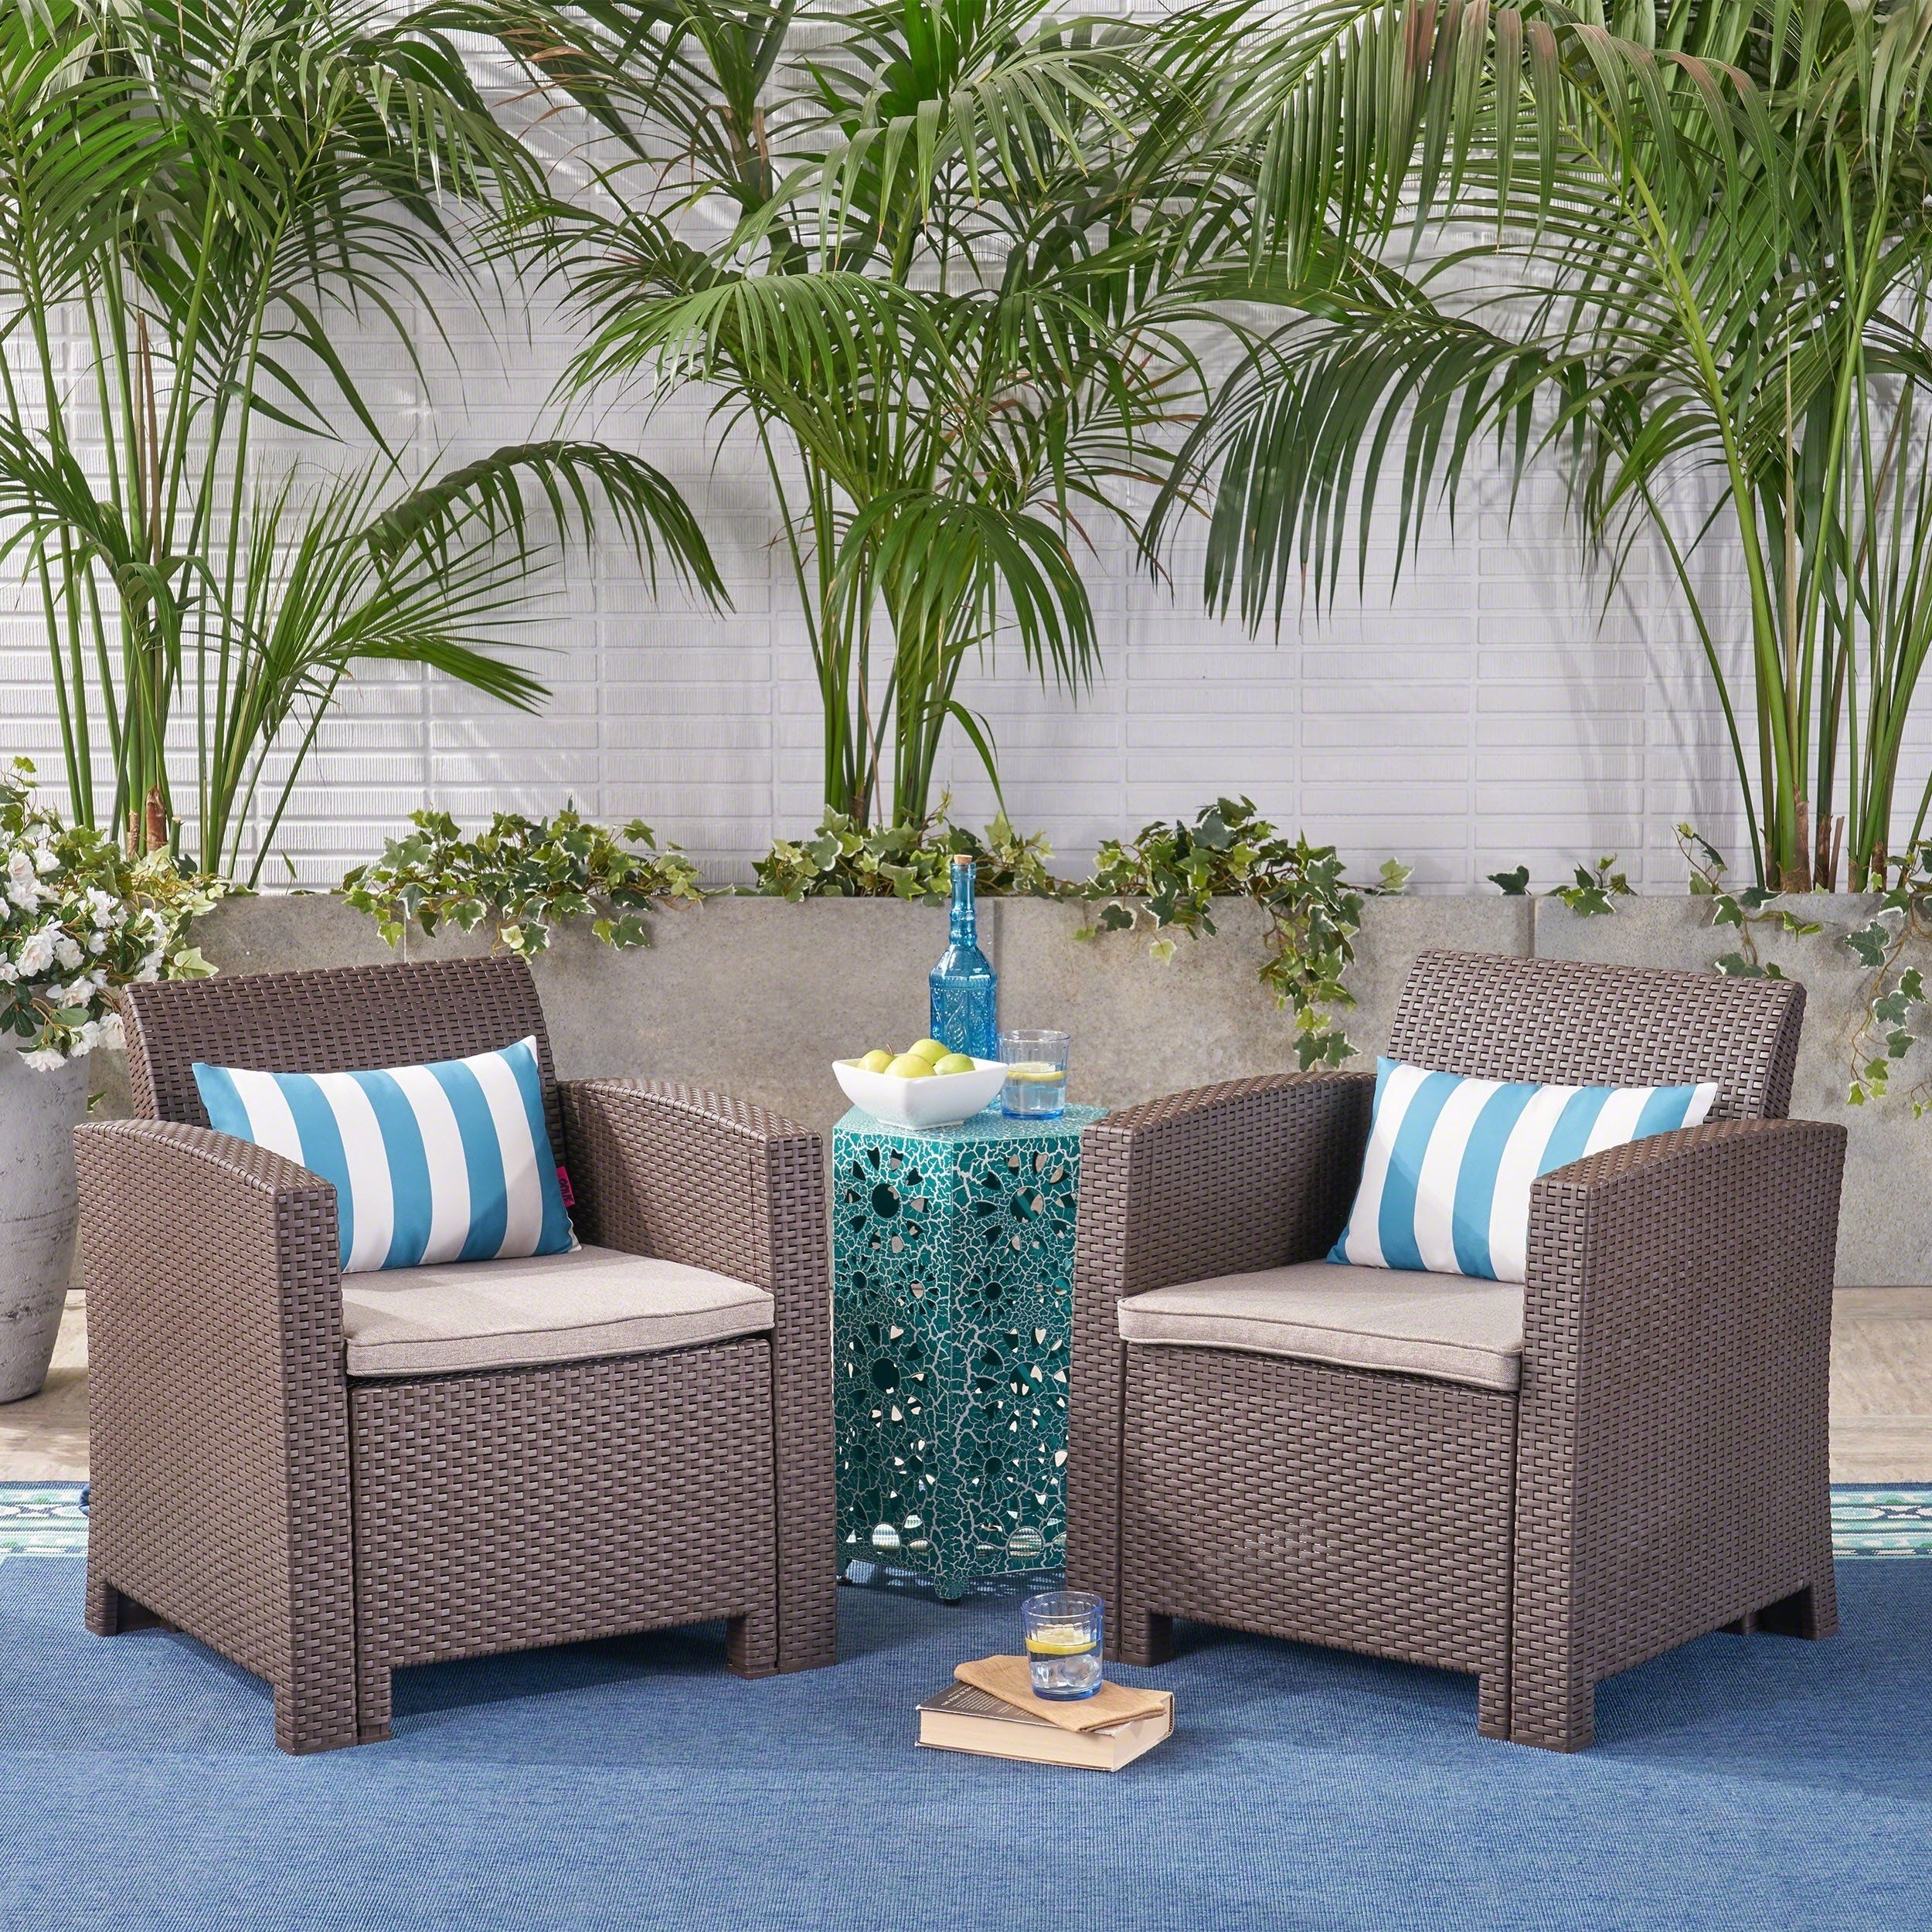 Buy 2 Outdoor Sofas, Chairs & Sectionals Online At Overstock Within Alder Grande Ii Swivel Chairs (View 19 of 20)